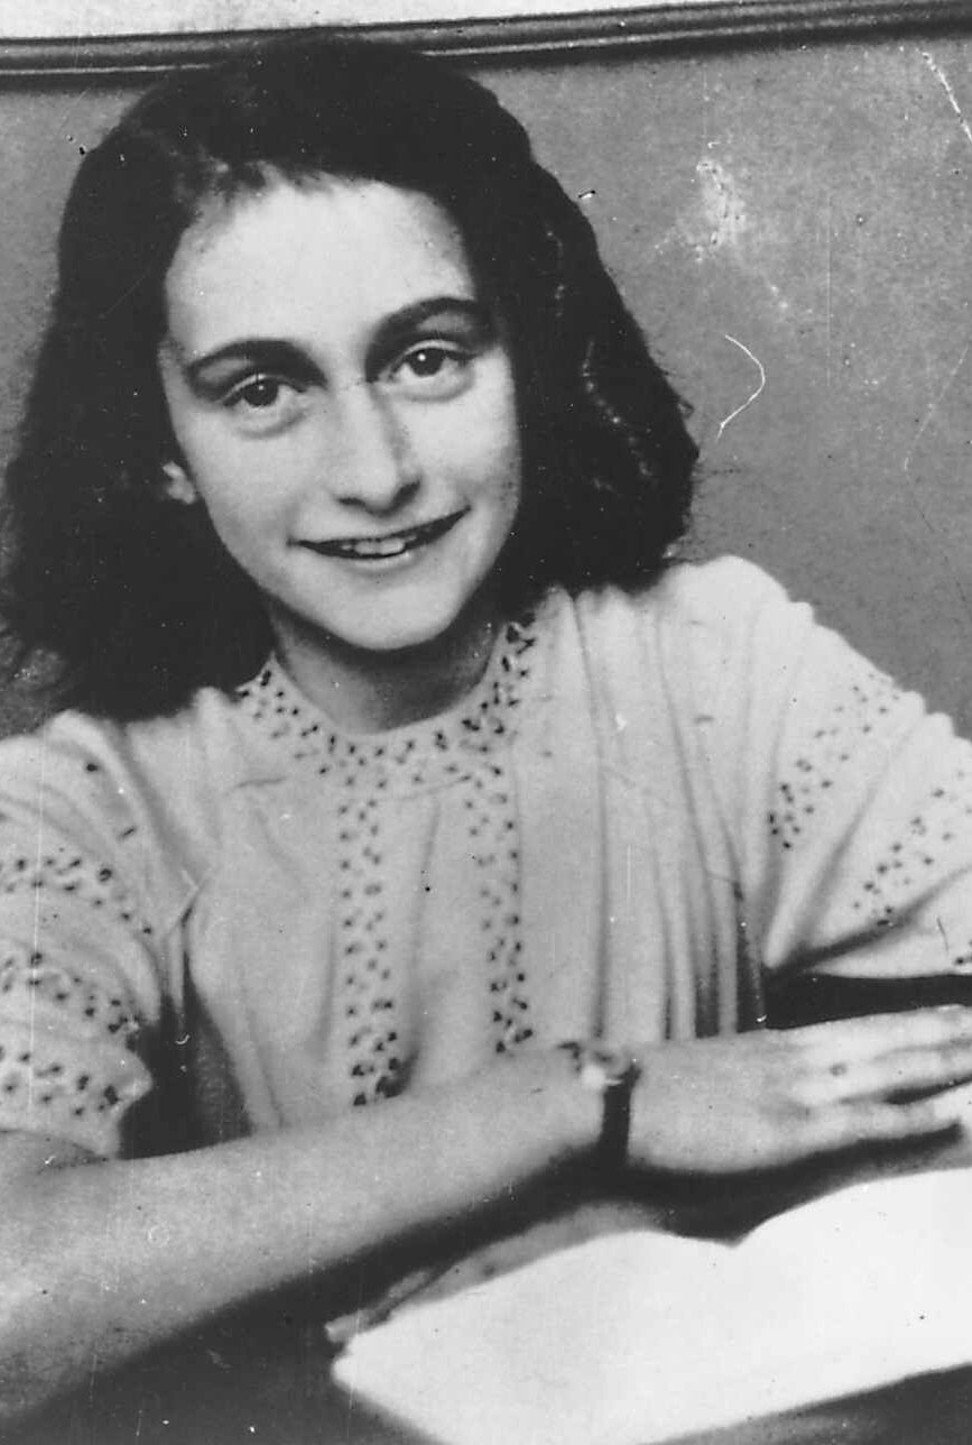 Anne Frank, who wrote a diary of Nazi persecution that shocked the world, died at the age of 15. He father survived the war and died aged 91 in August 1980. Photo: AP/The Herald Dispatch